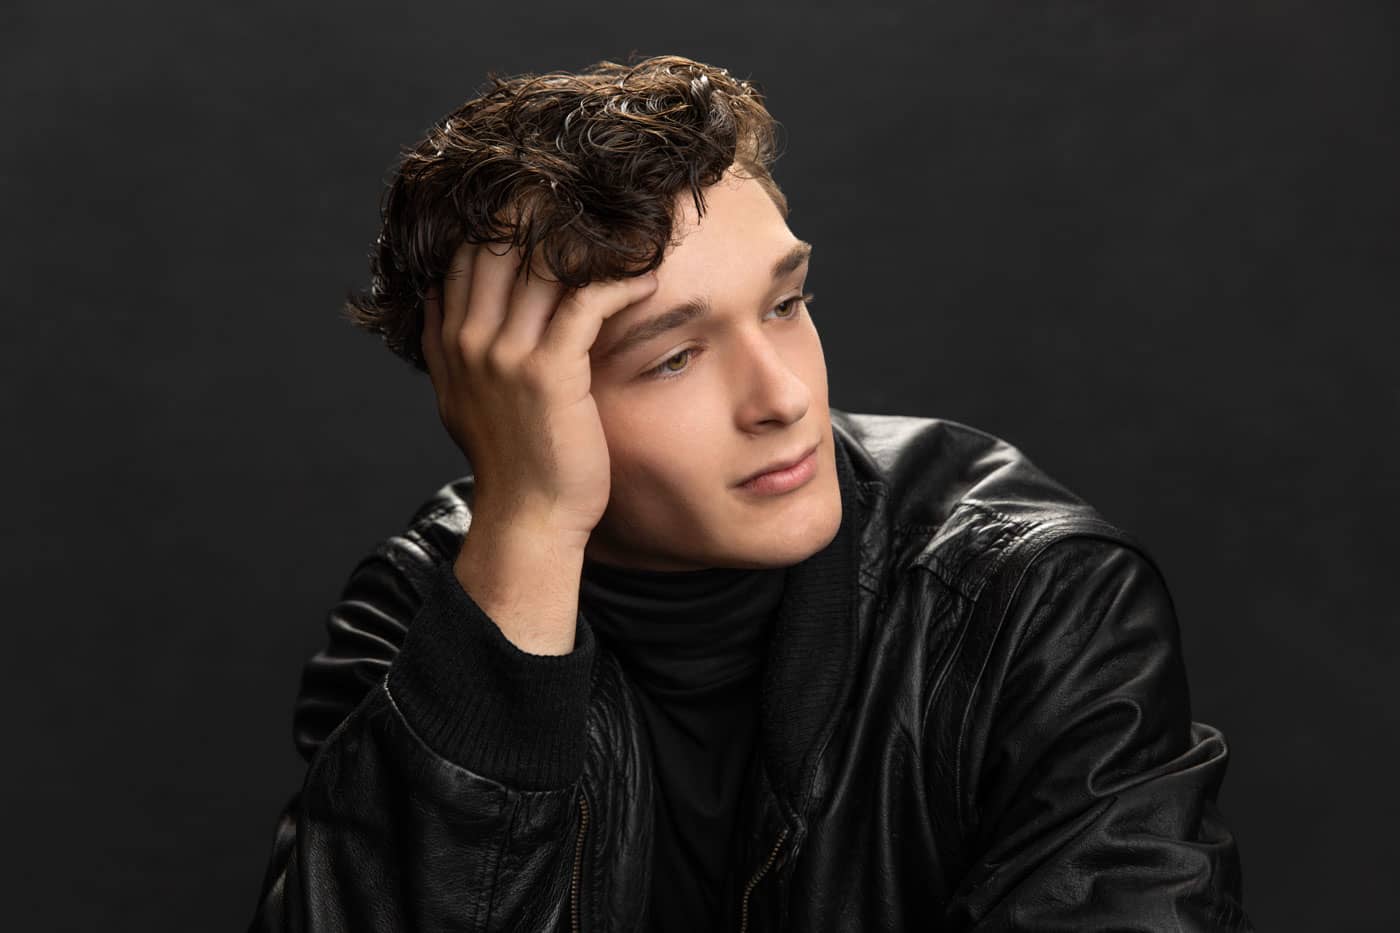 Sharp photo of a handsome young man with curly brown hair looking away wearing a black leather jacket. His head is leaning on his hand, with his fingers in his hair. Lucas Nichter Senior Portrait Photography.